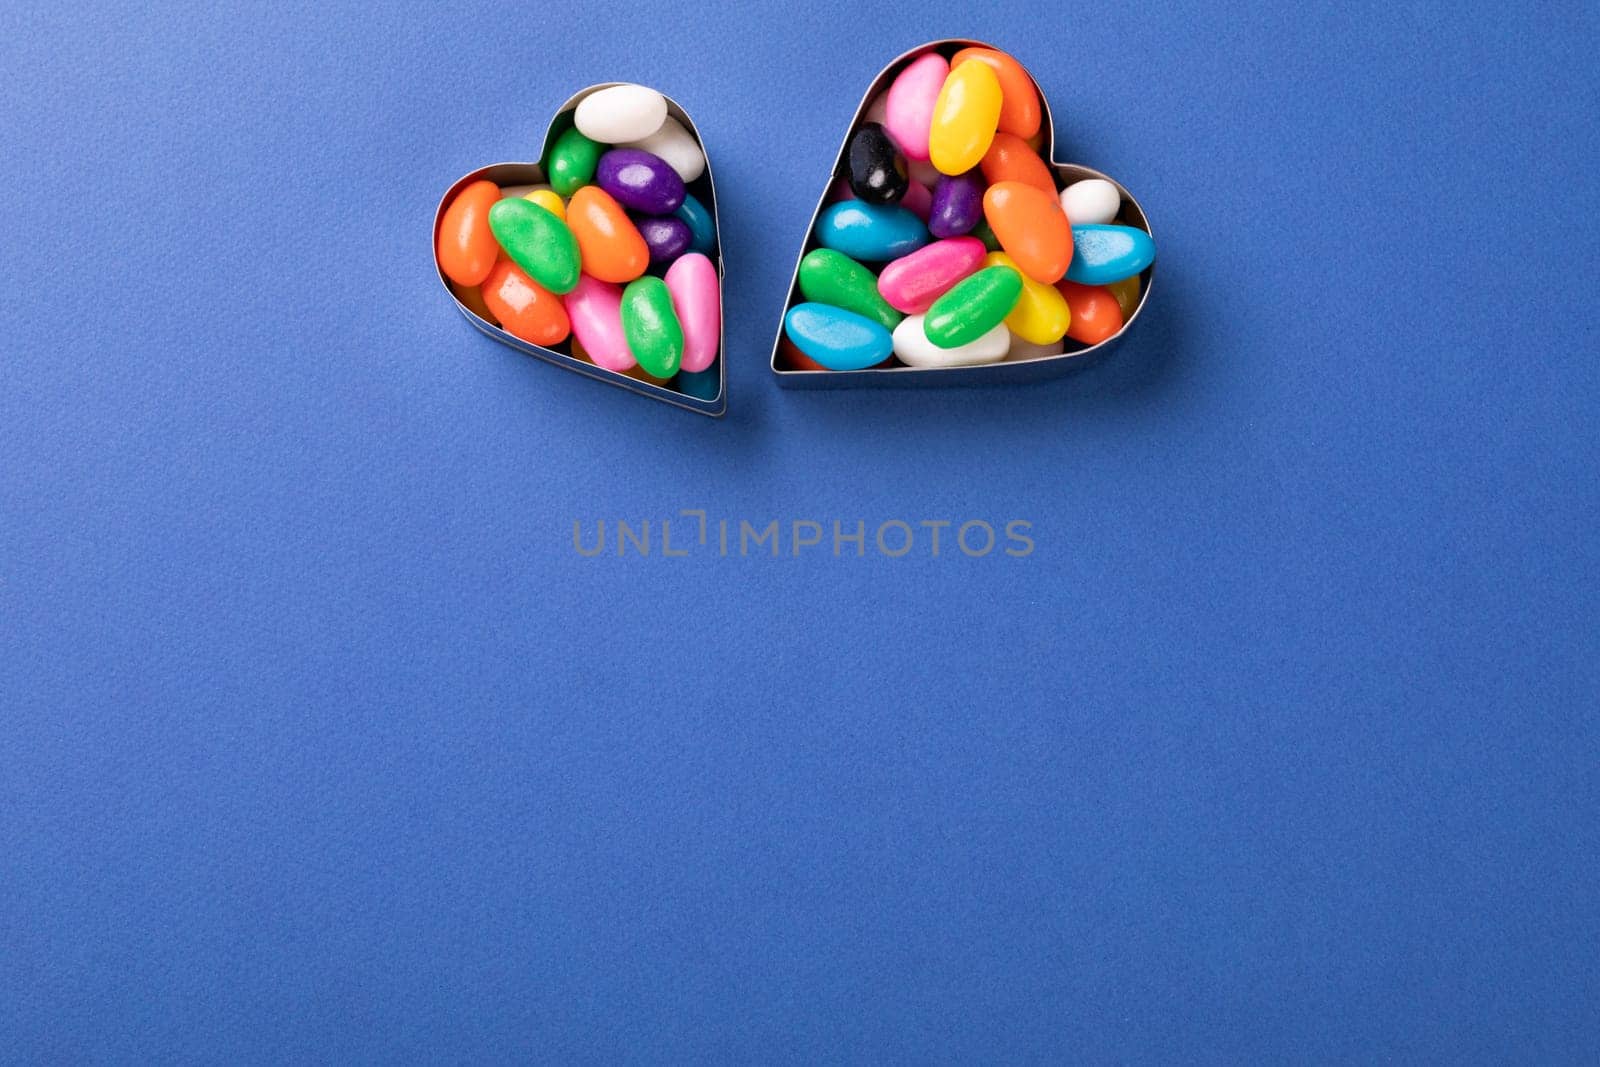 Directly above view of colorful candies in heart shape containers over copy space on blue background by Wavebreakmedia